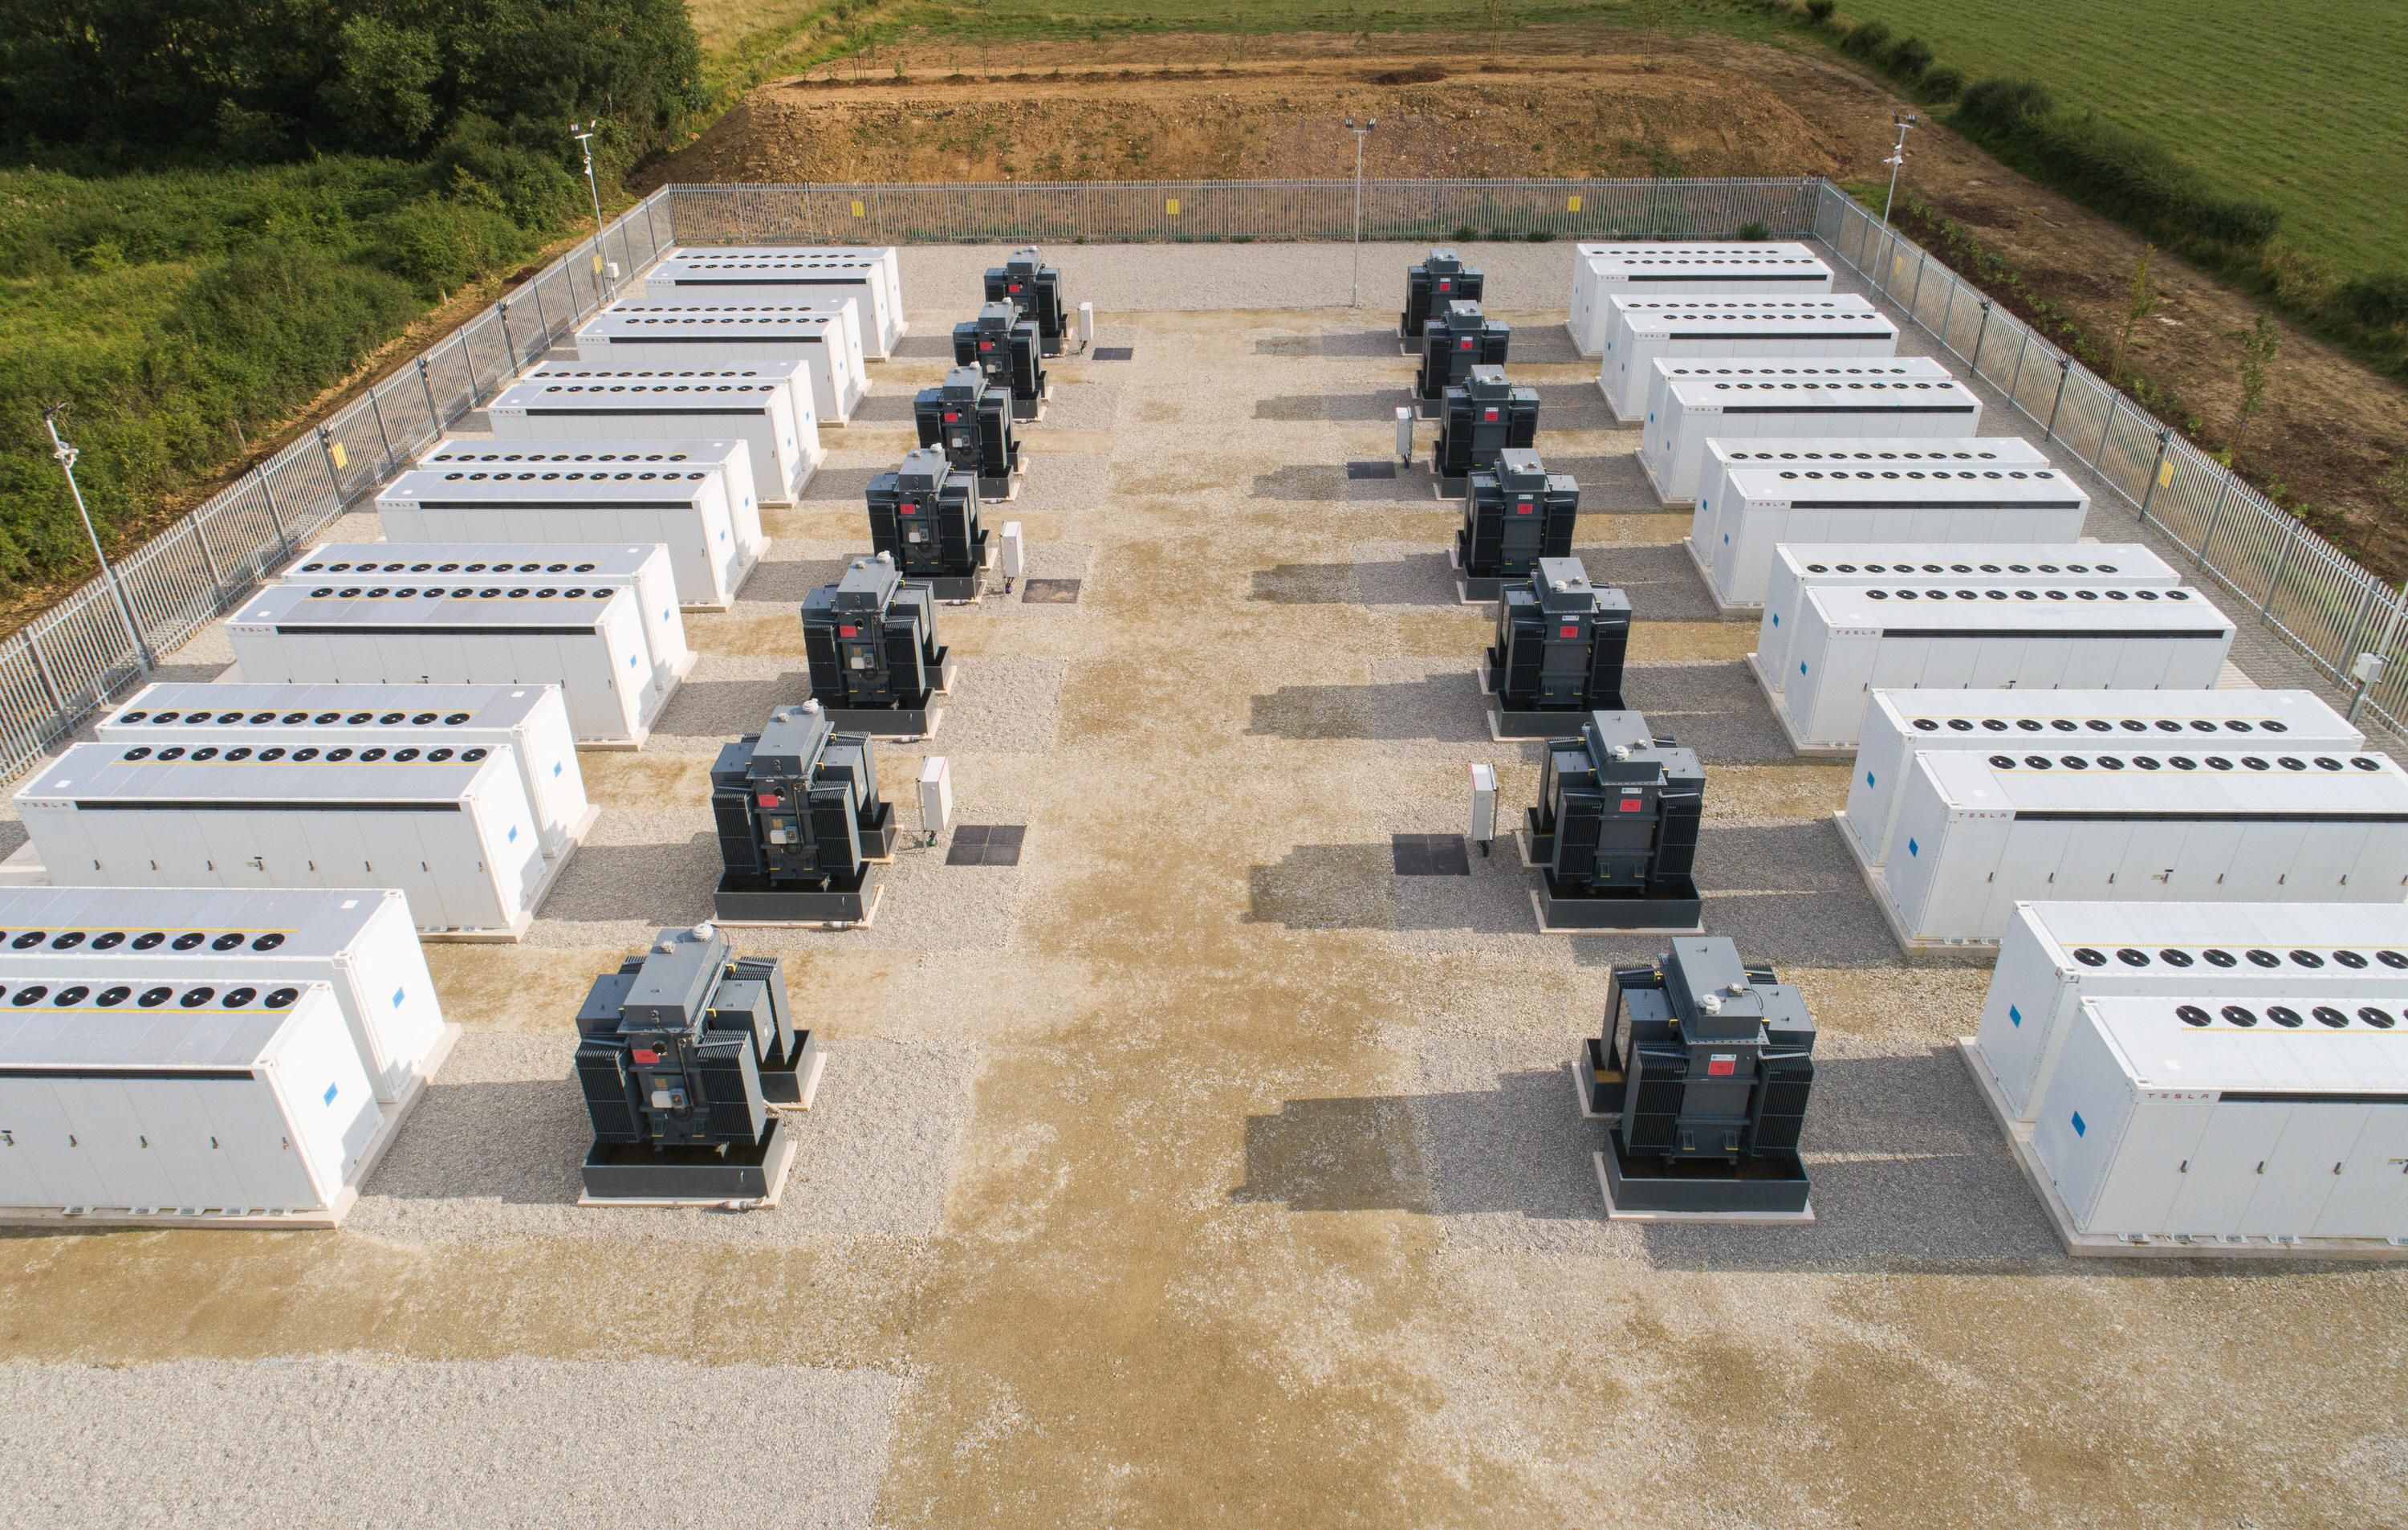 Overhead photo shows 7 large white containers and 7 black and gray large equipment boxes each on the left and right side in a grid. 